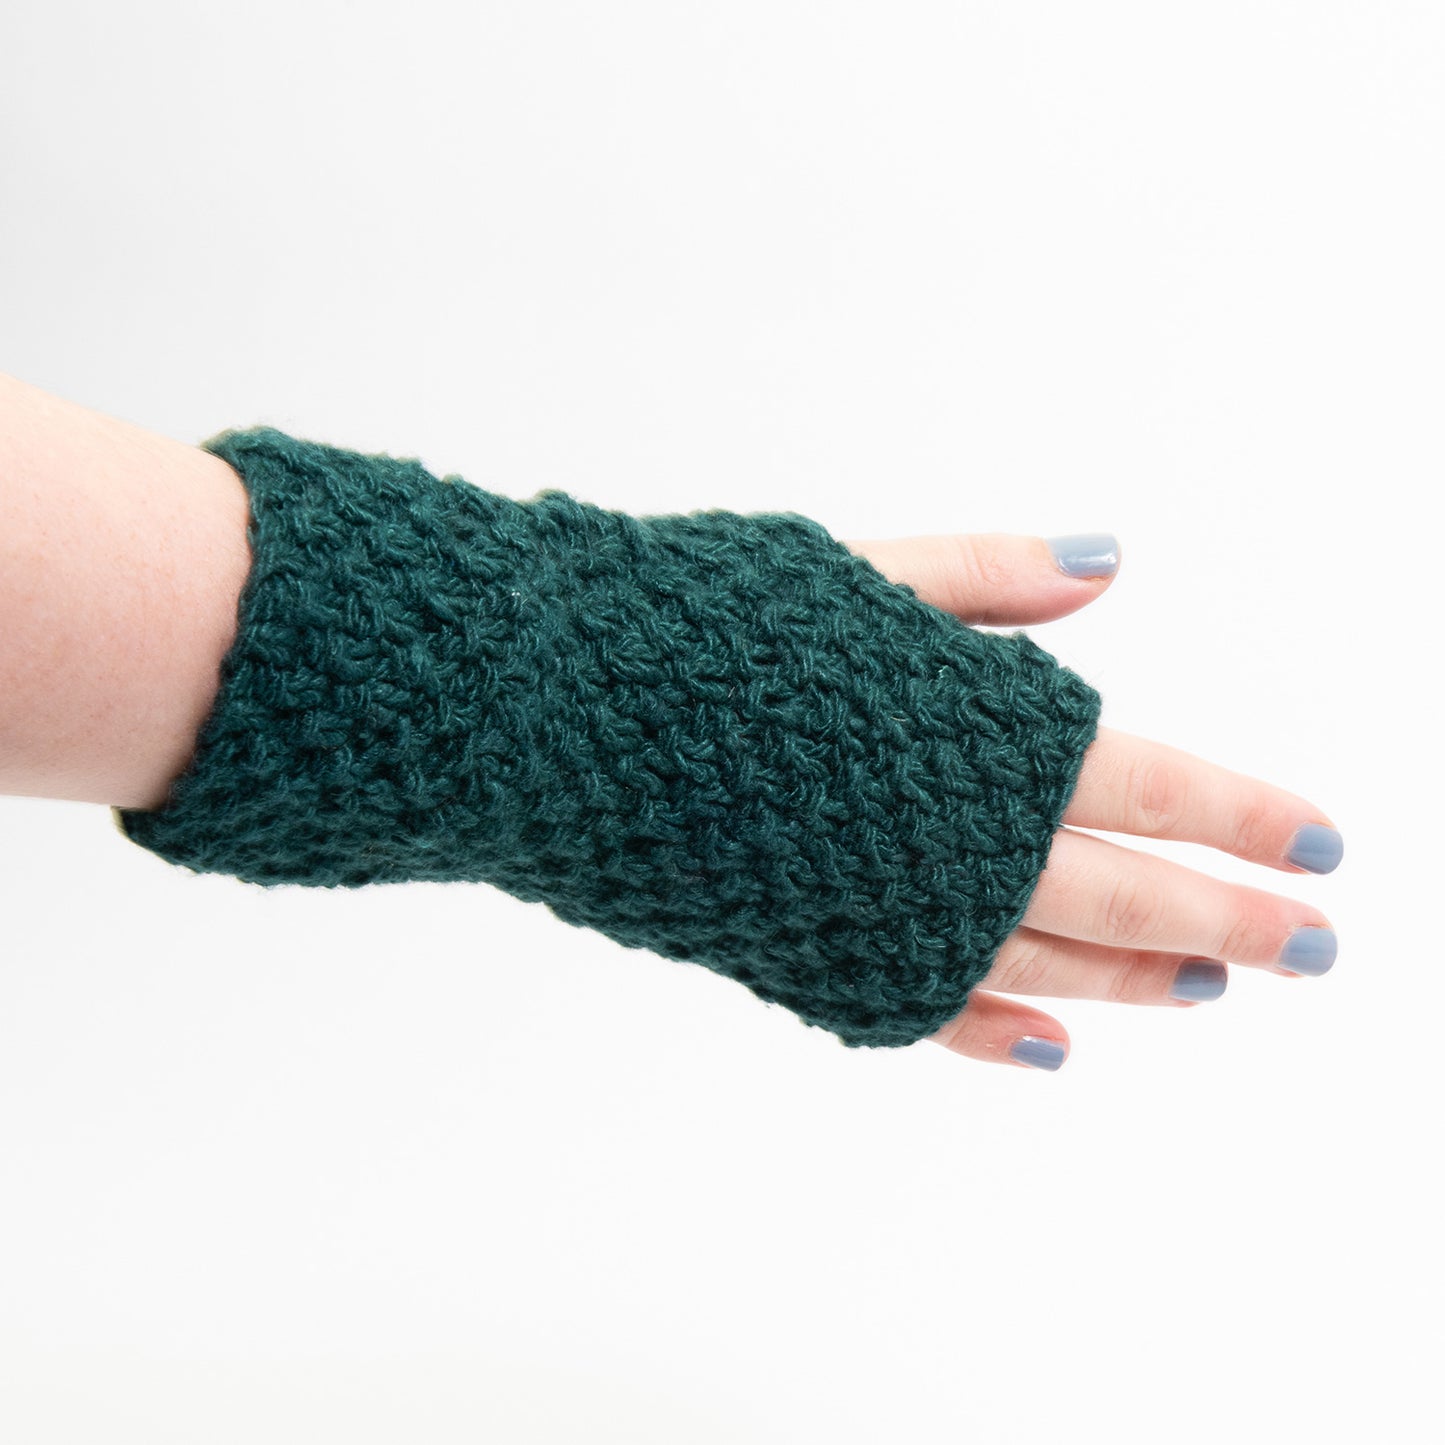 A teal green wristwarmer modelled on a hand and pictured on a white background.